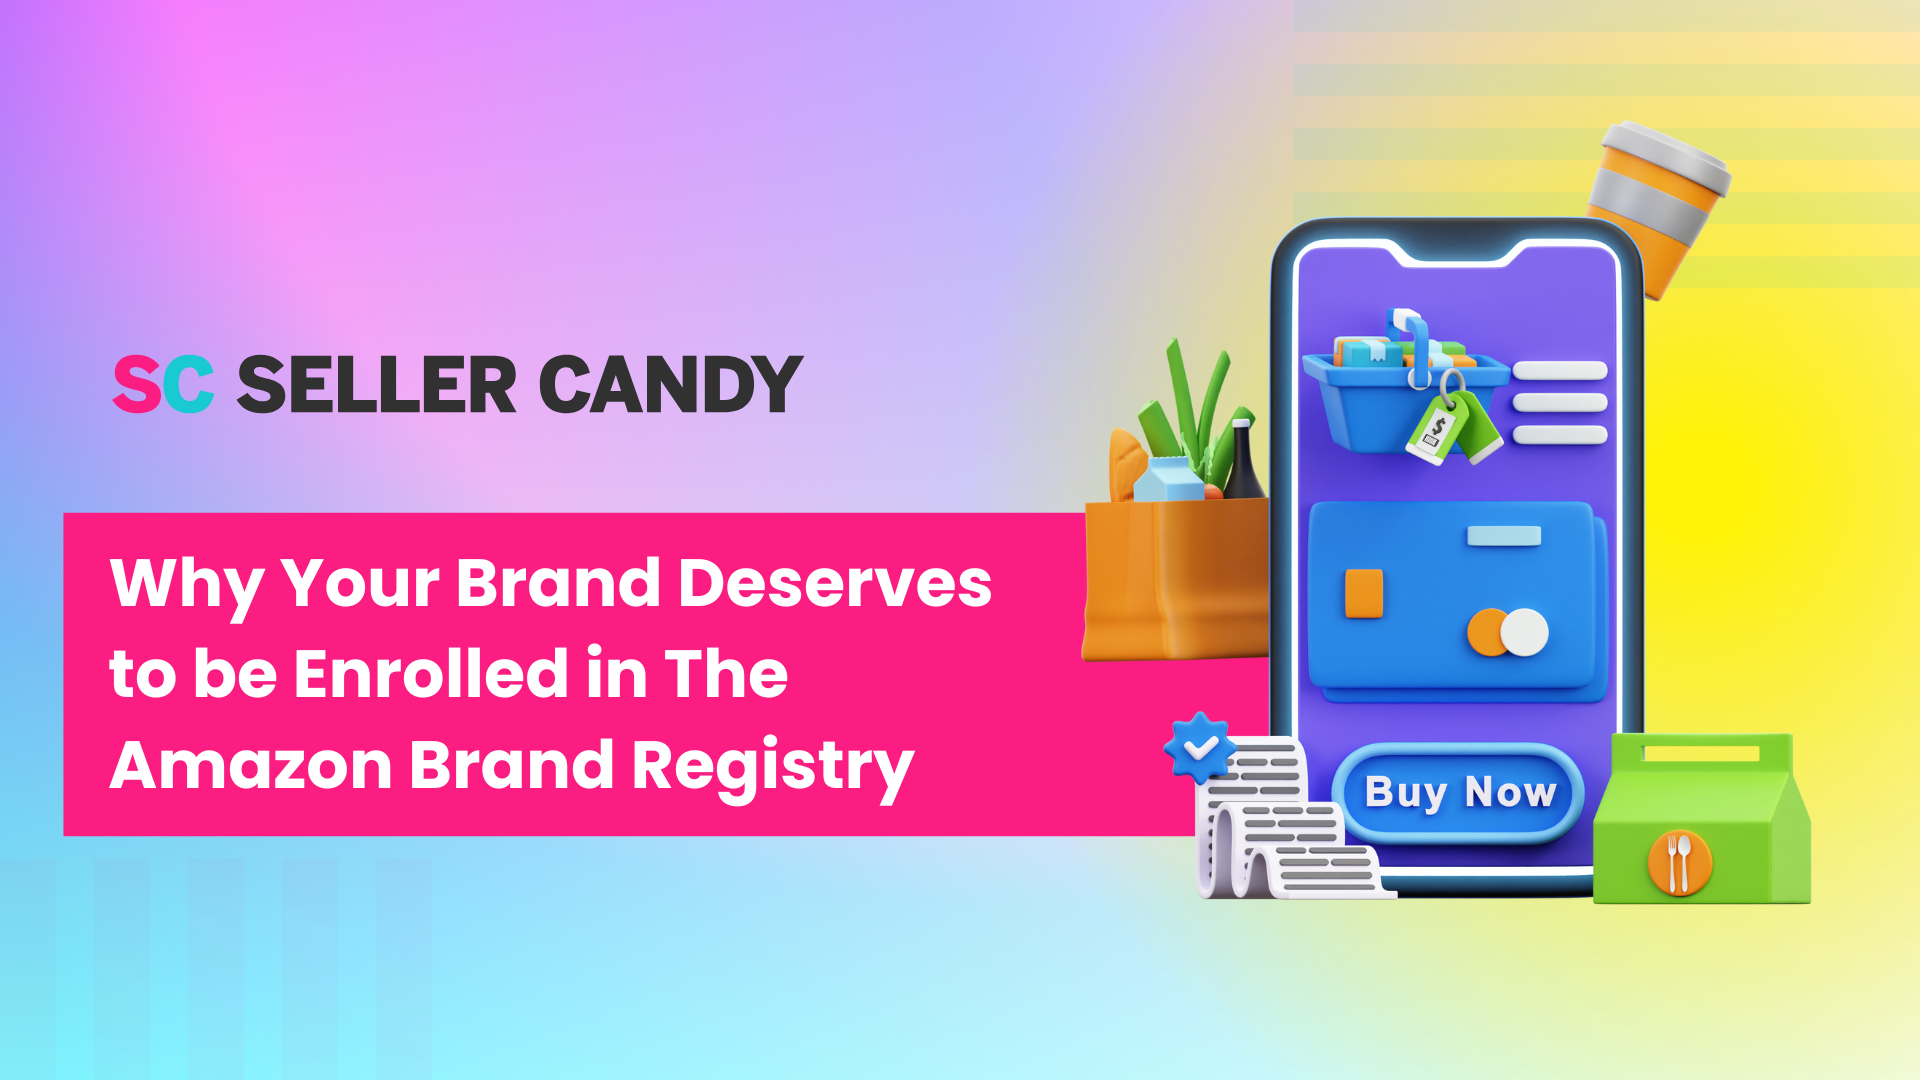 Why Your Brand Deserves to be Enrolled in The Amazon Brand Registry